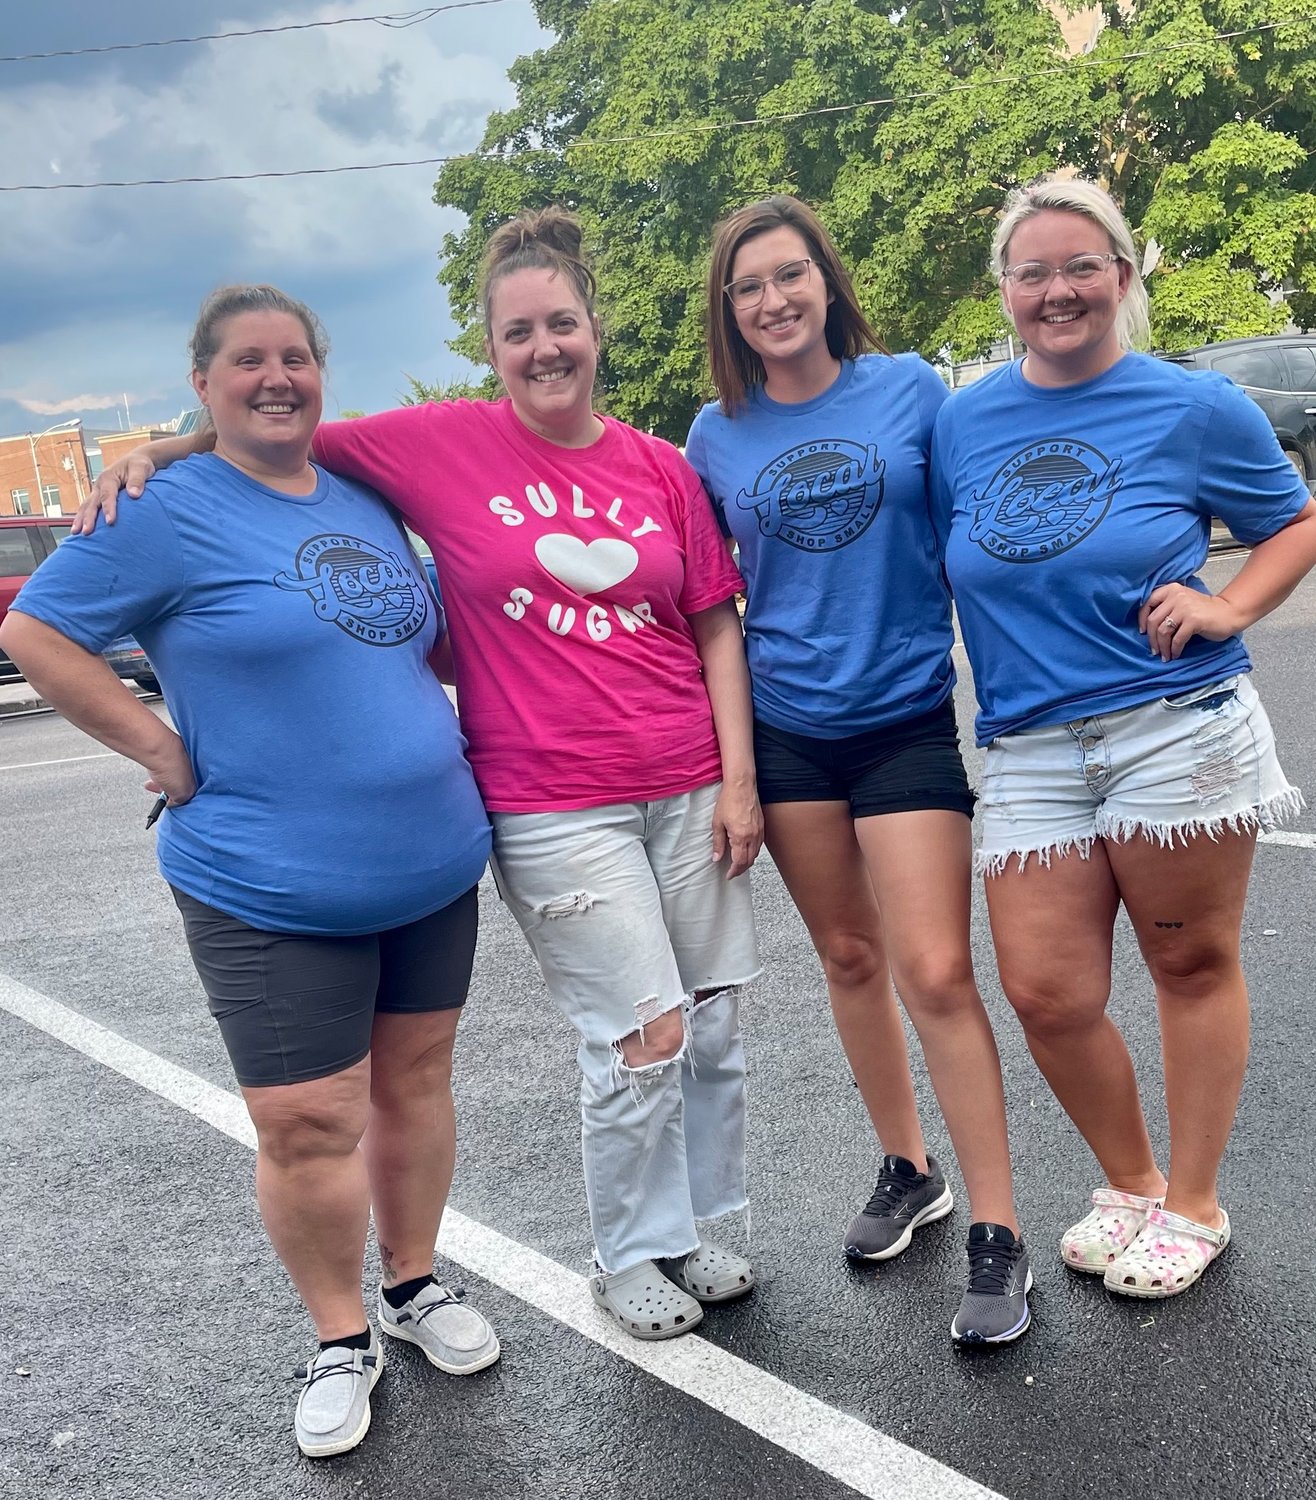 This past Sunday, a group of local businesses teamed up to host a “Pie Your Favorite Business Owner” event. Pictured from Left to Right: Heather Capps, Owner of The Wild Honey Boutique; Amanda Stroup, Owner of Sully Loves Sugar; Lorissa Ellis, Owner of The Shabby Sheep; and Amber Brand, Owner of Clay Street Boutique. (Not pictured: Sami Petary, Owner of The Social).